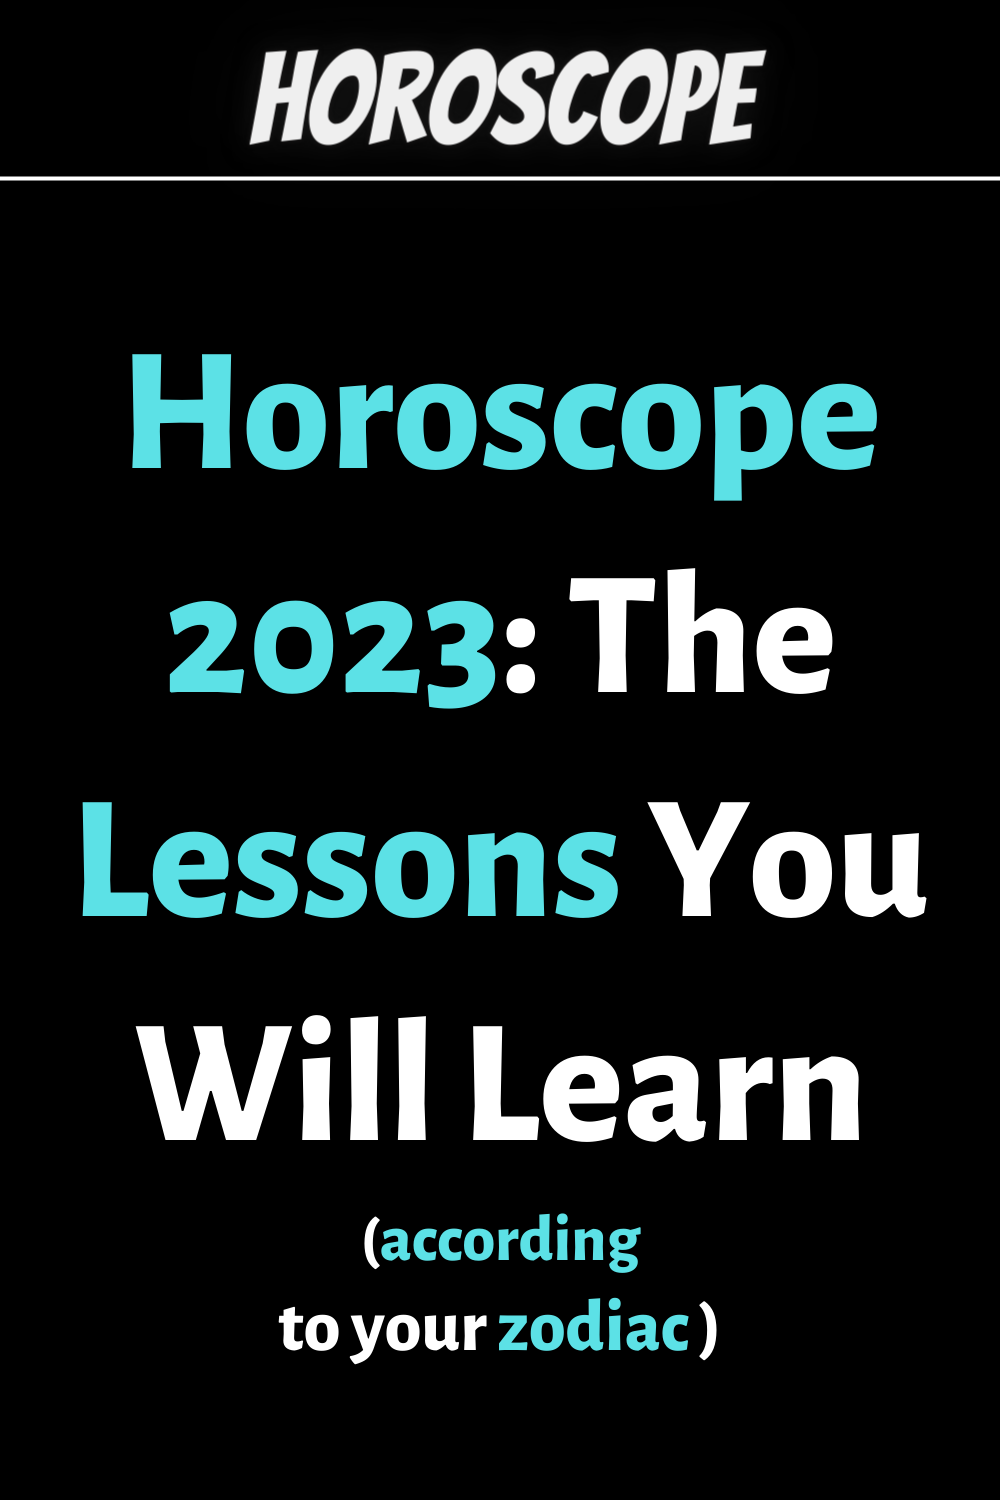 Horoscope 2023: The Lessons You Will Learn